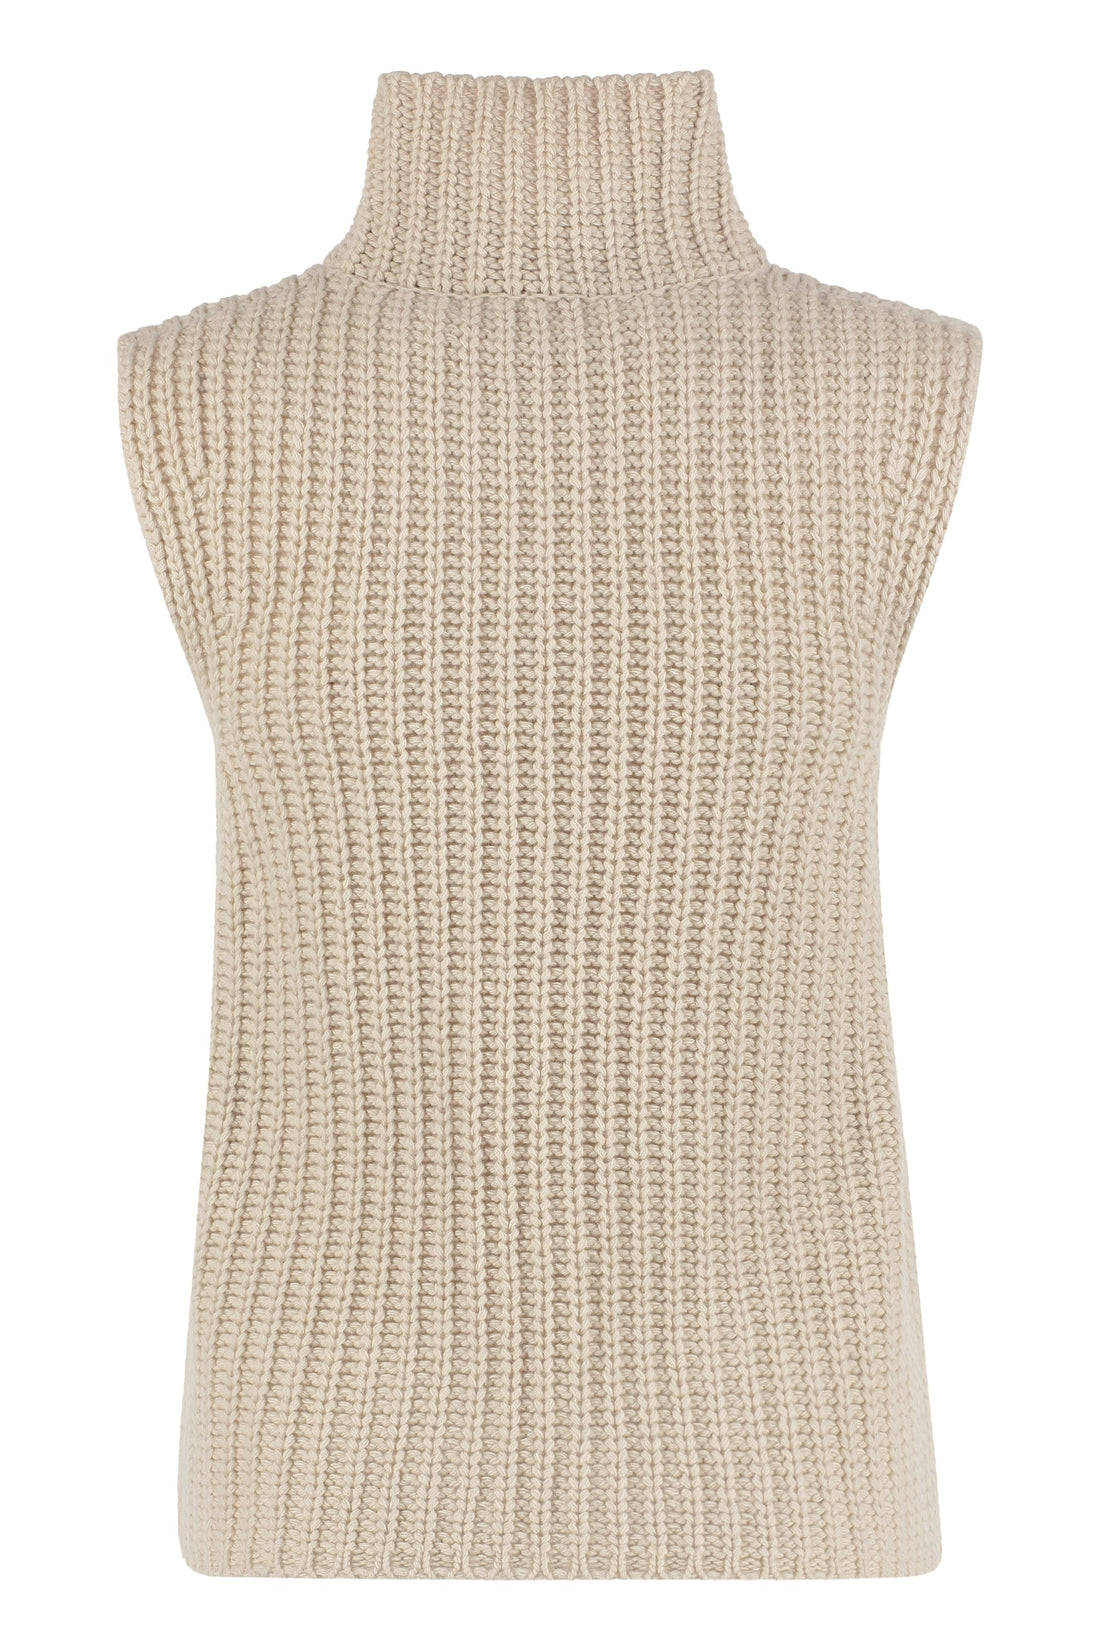 Weekend Max Mara-OUTLET-SALE-Toano ribbed knit vest-ARCHIVIST